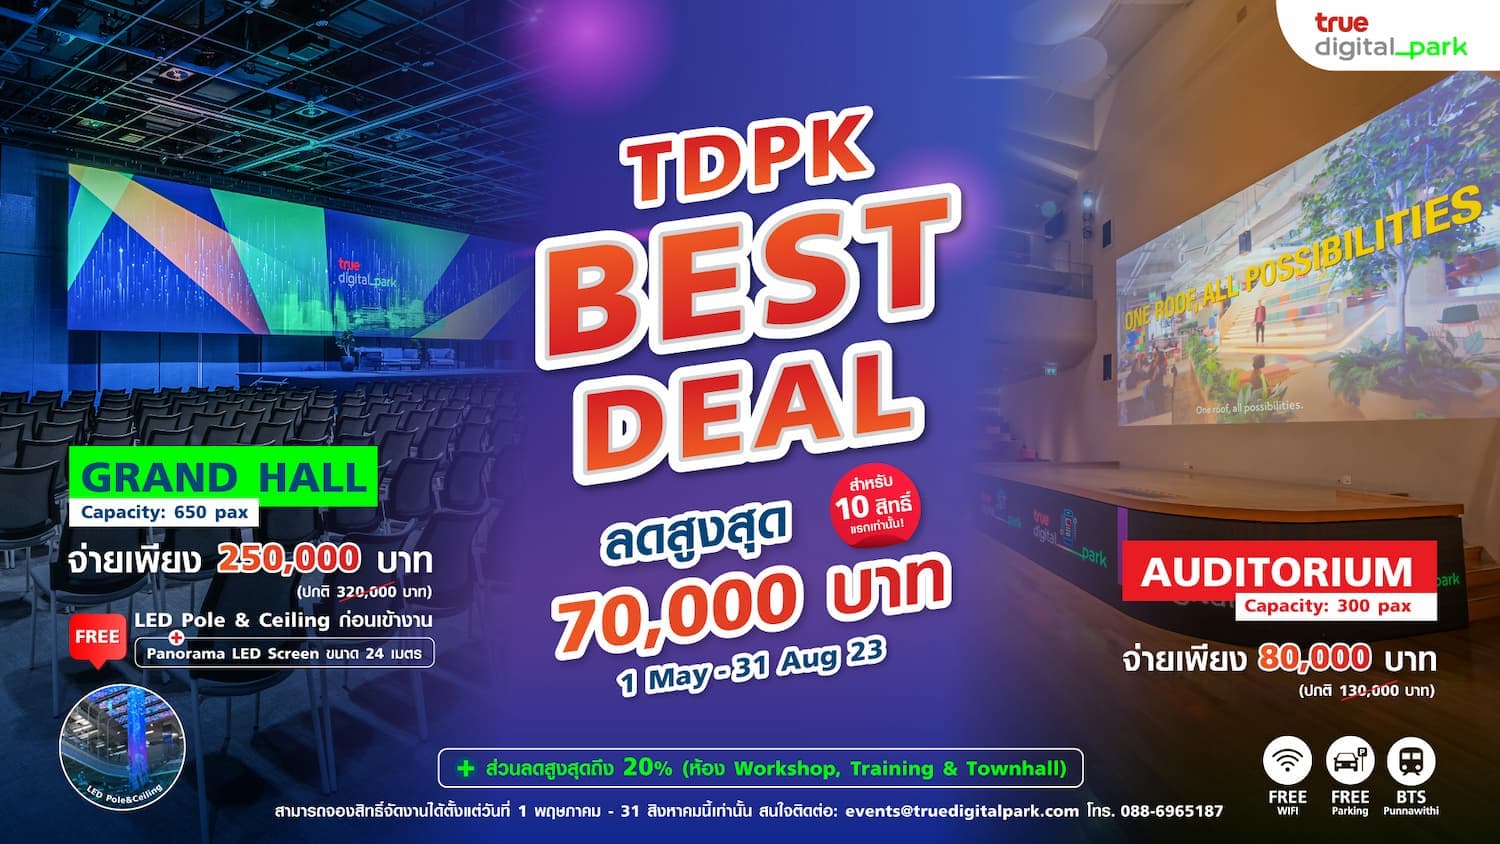 TDPK Best Deal: Get up to 70,000-baht discount on event space rental